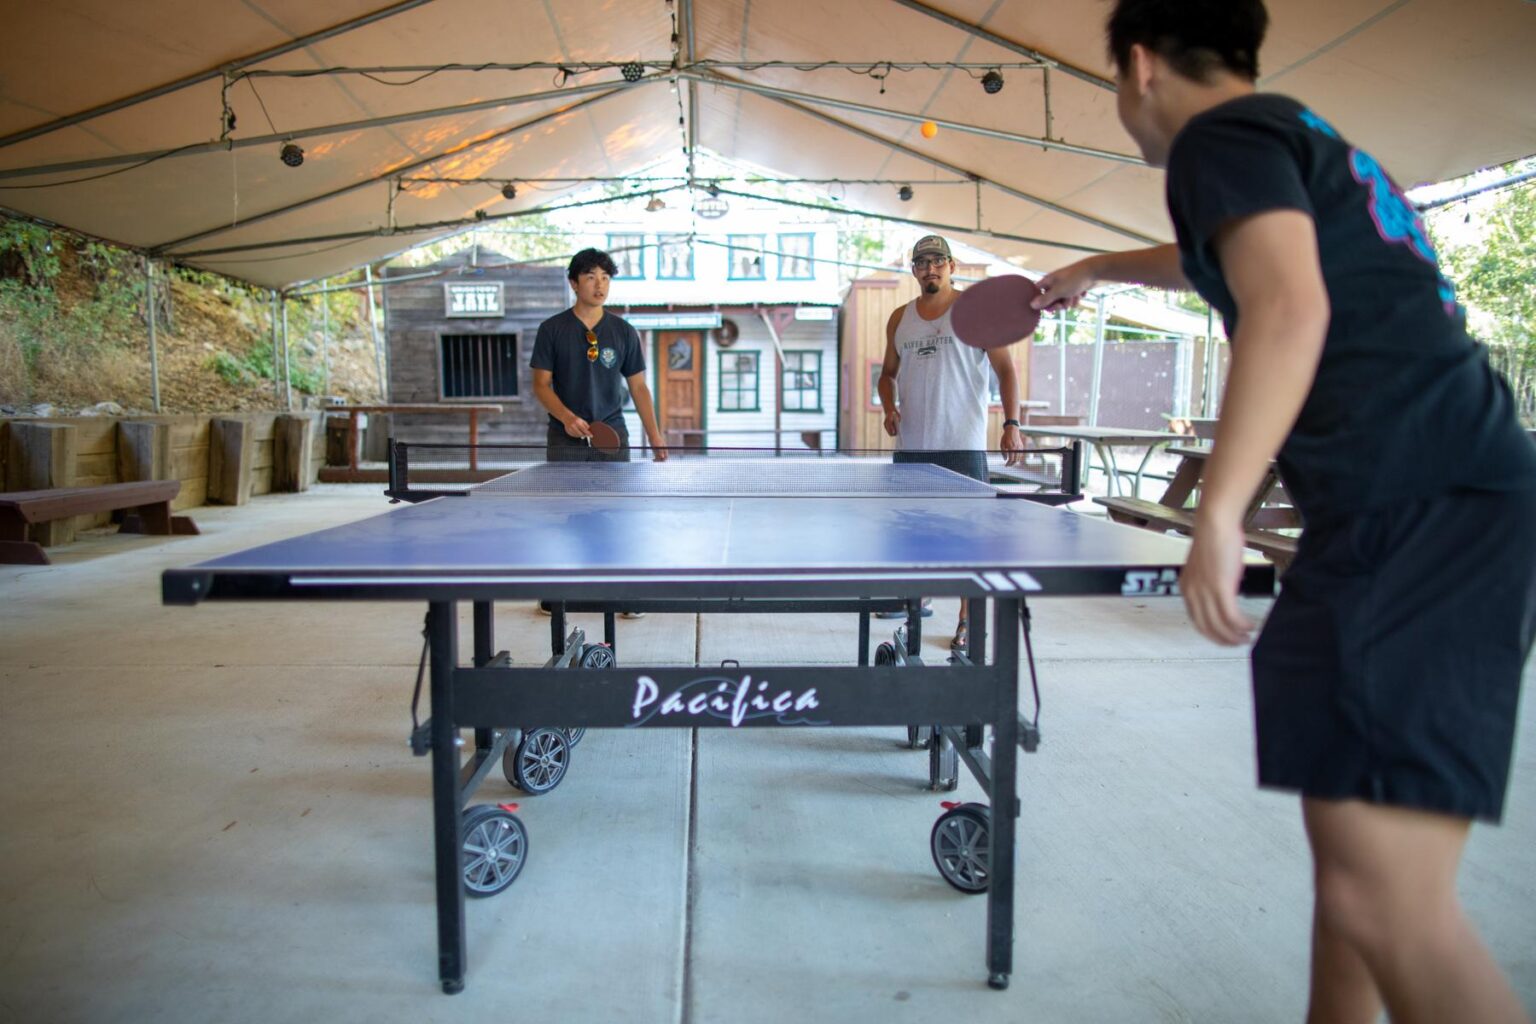 Two young adults play pingpong at a table under a large canvas tent while an adult watches.